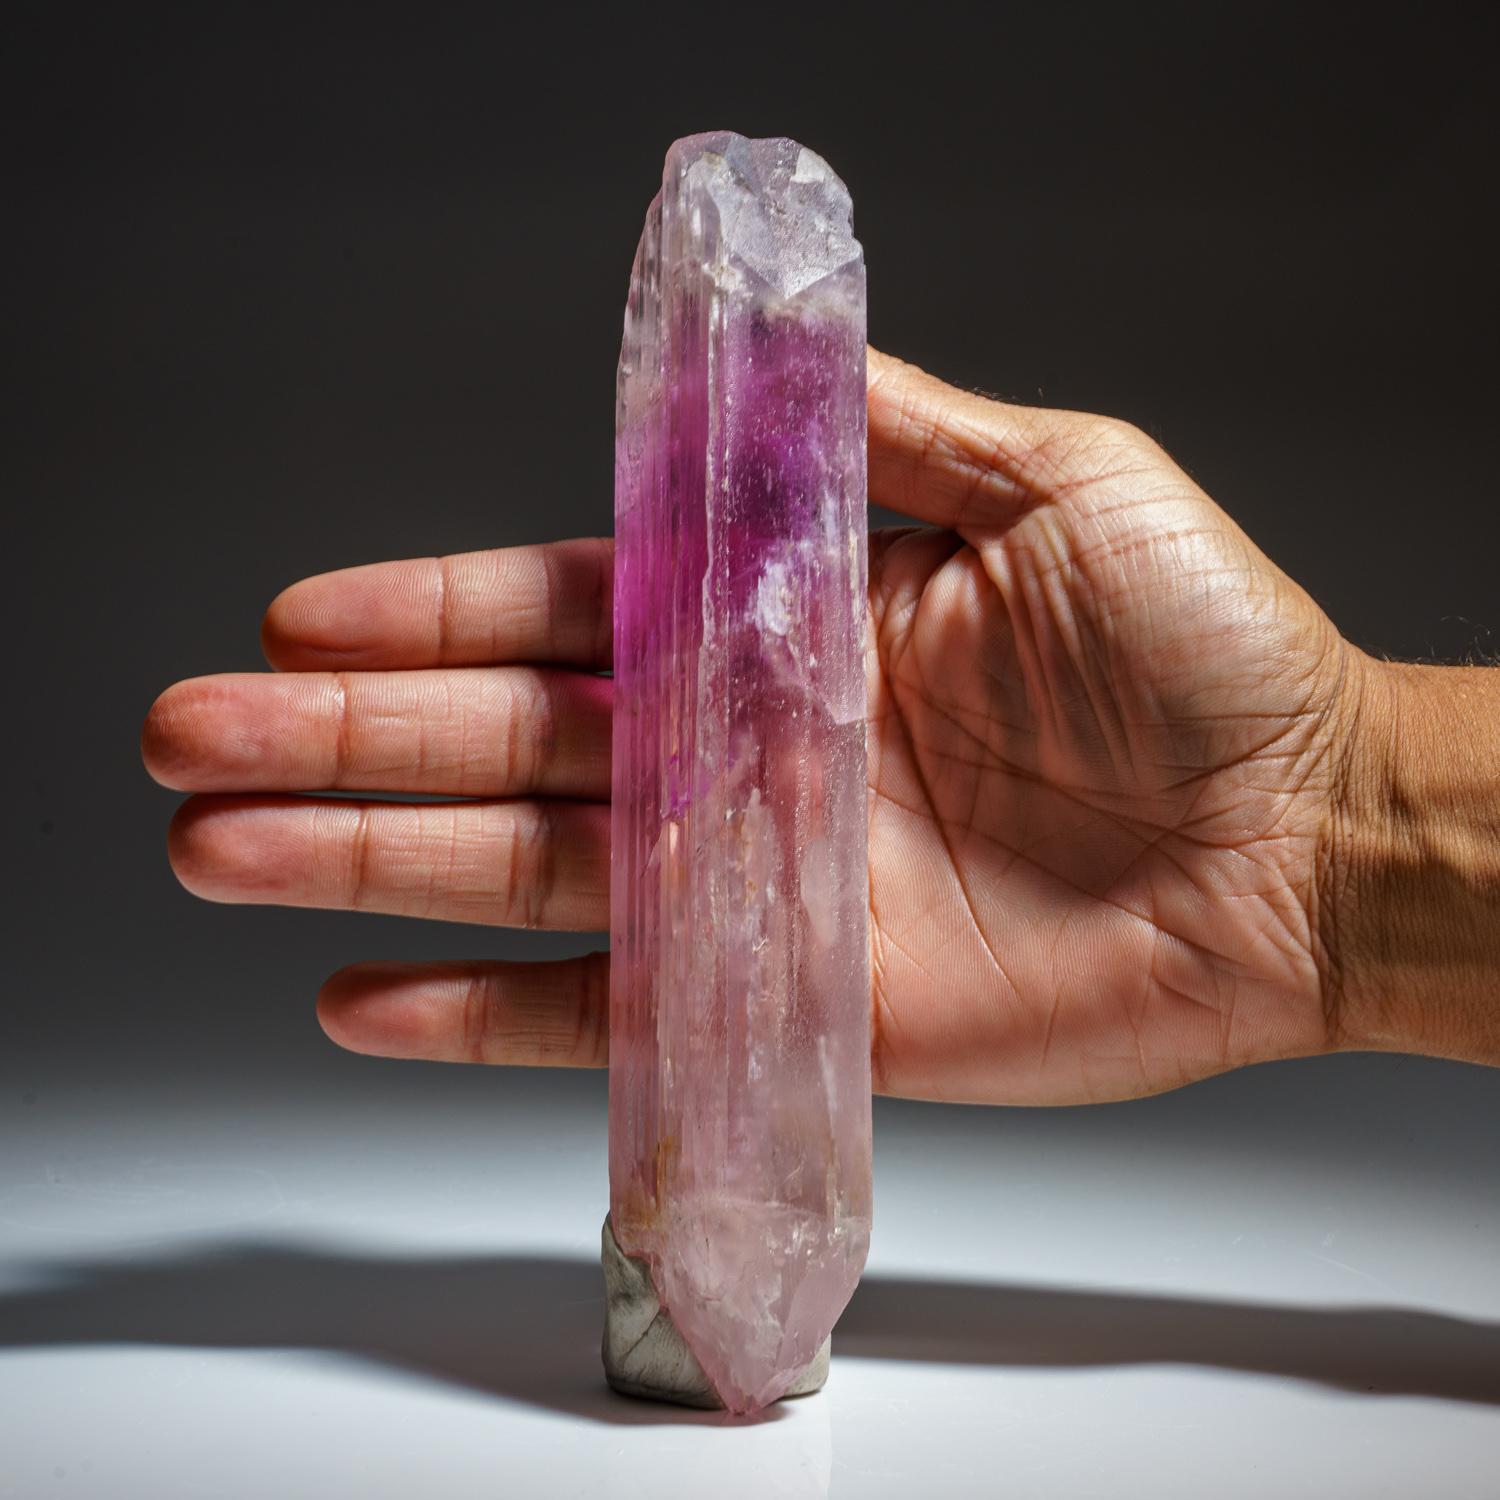 Fully terminated single crystal of transparent gem quality spodumene var. Kunzite. The crystal faces are composed of smaller lustrous parallel crystal faces.

Kunzite is a beautiful crystal, pure in energy and joyful in nature. In palest pink to